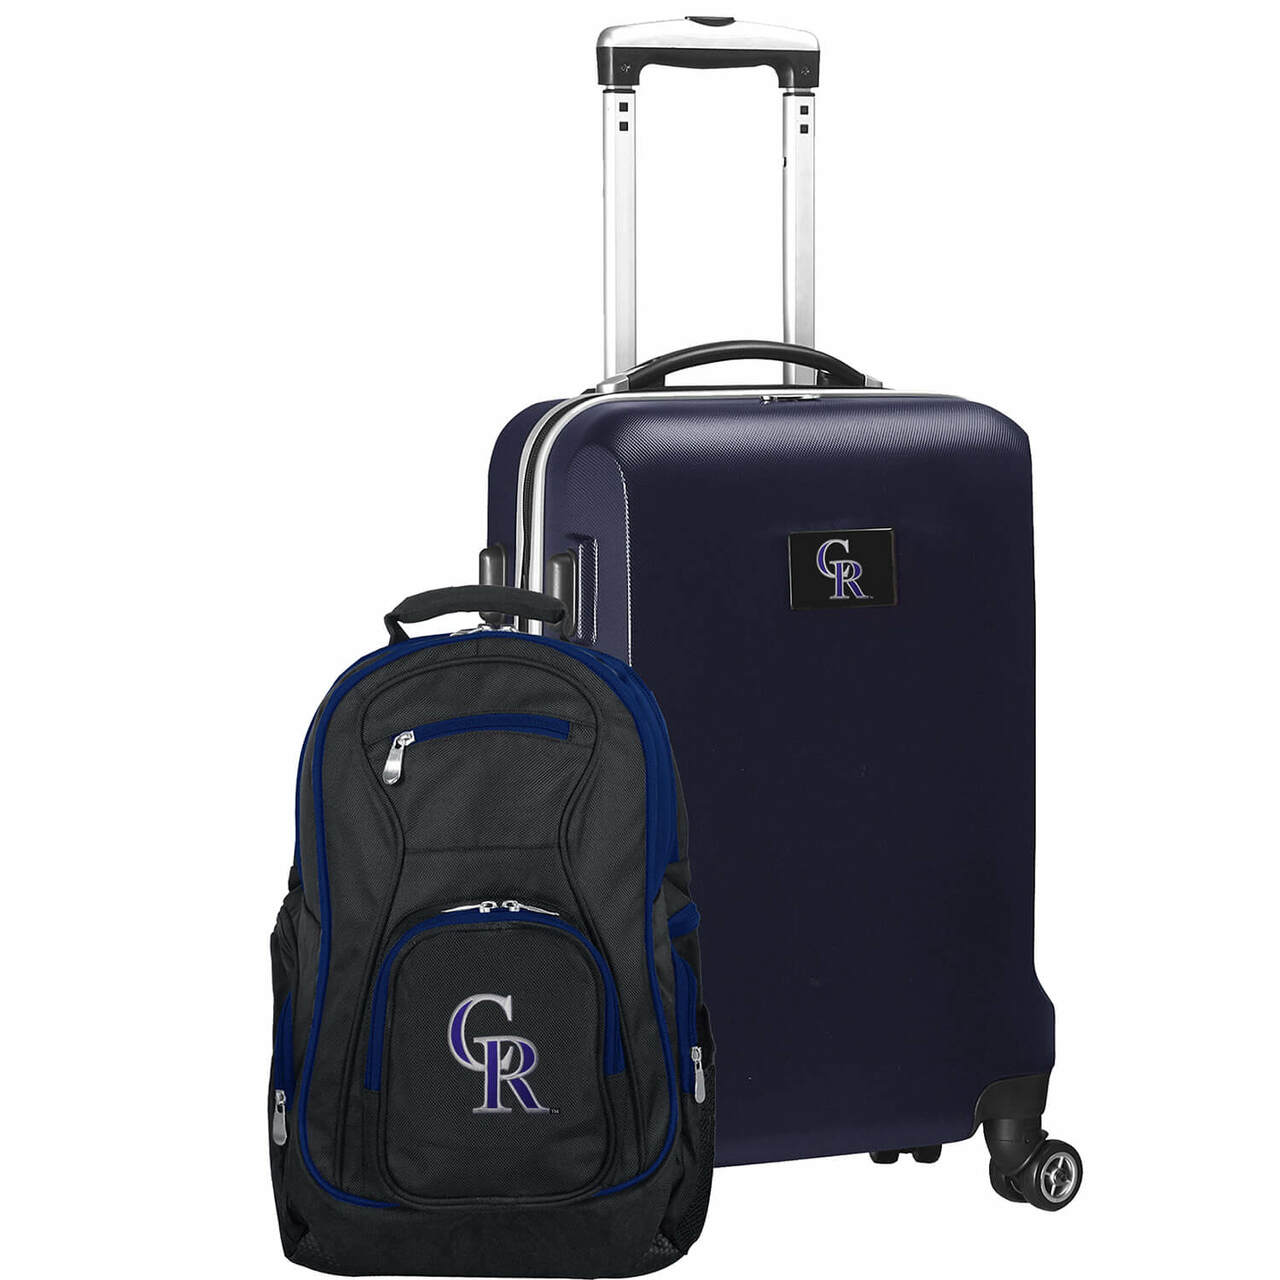 Colorado Rockies Deluxe 2-Piece Backpack and Carry on Set in Navy